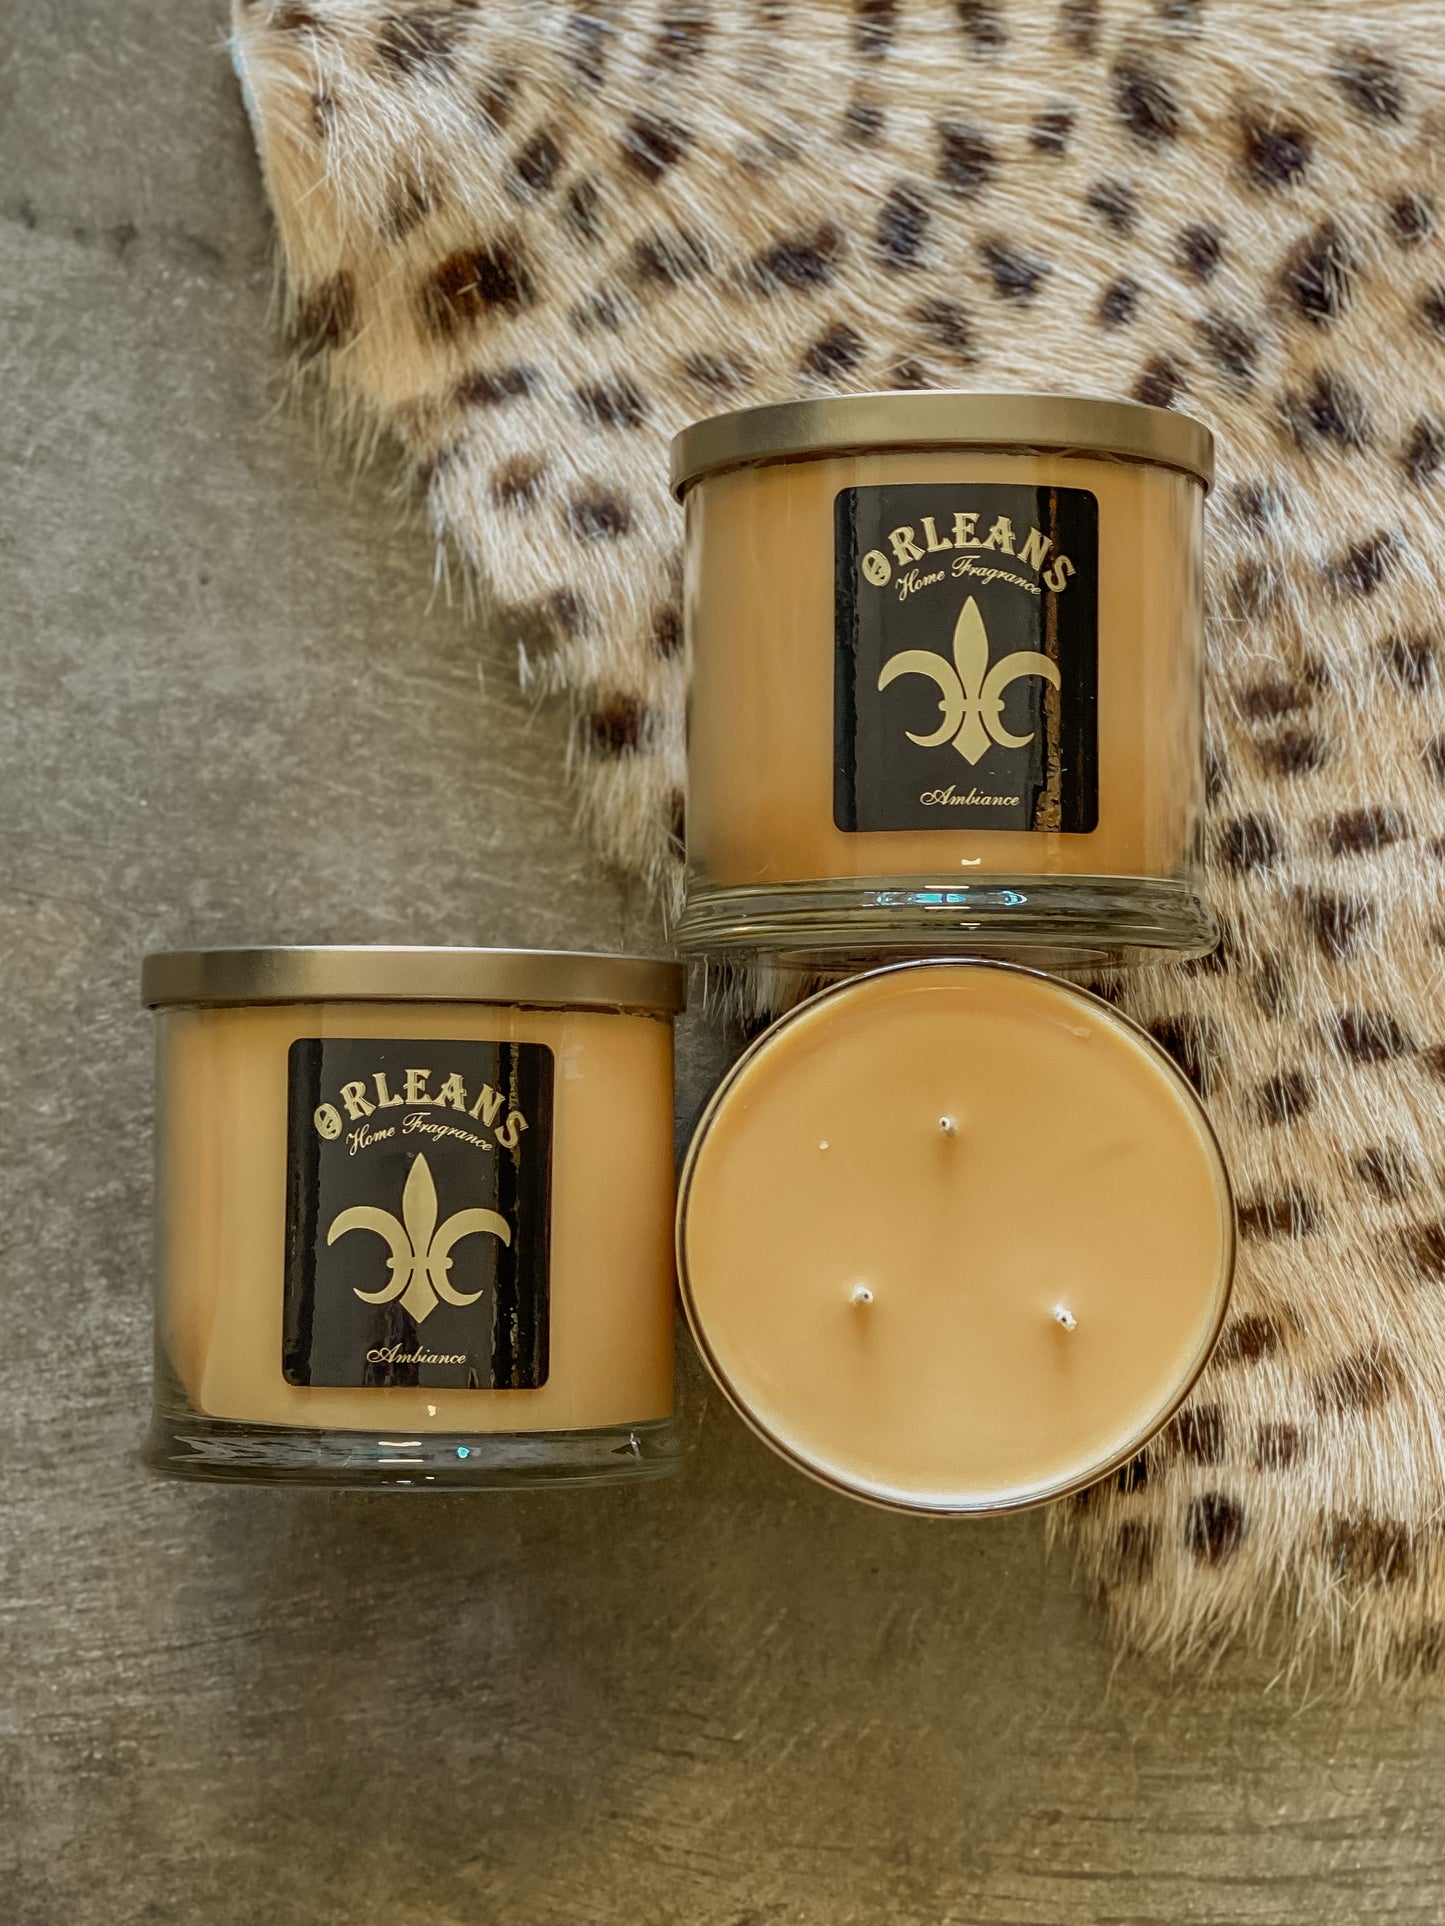 The Orleans Candle